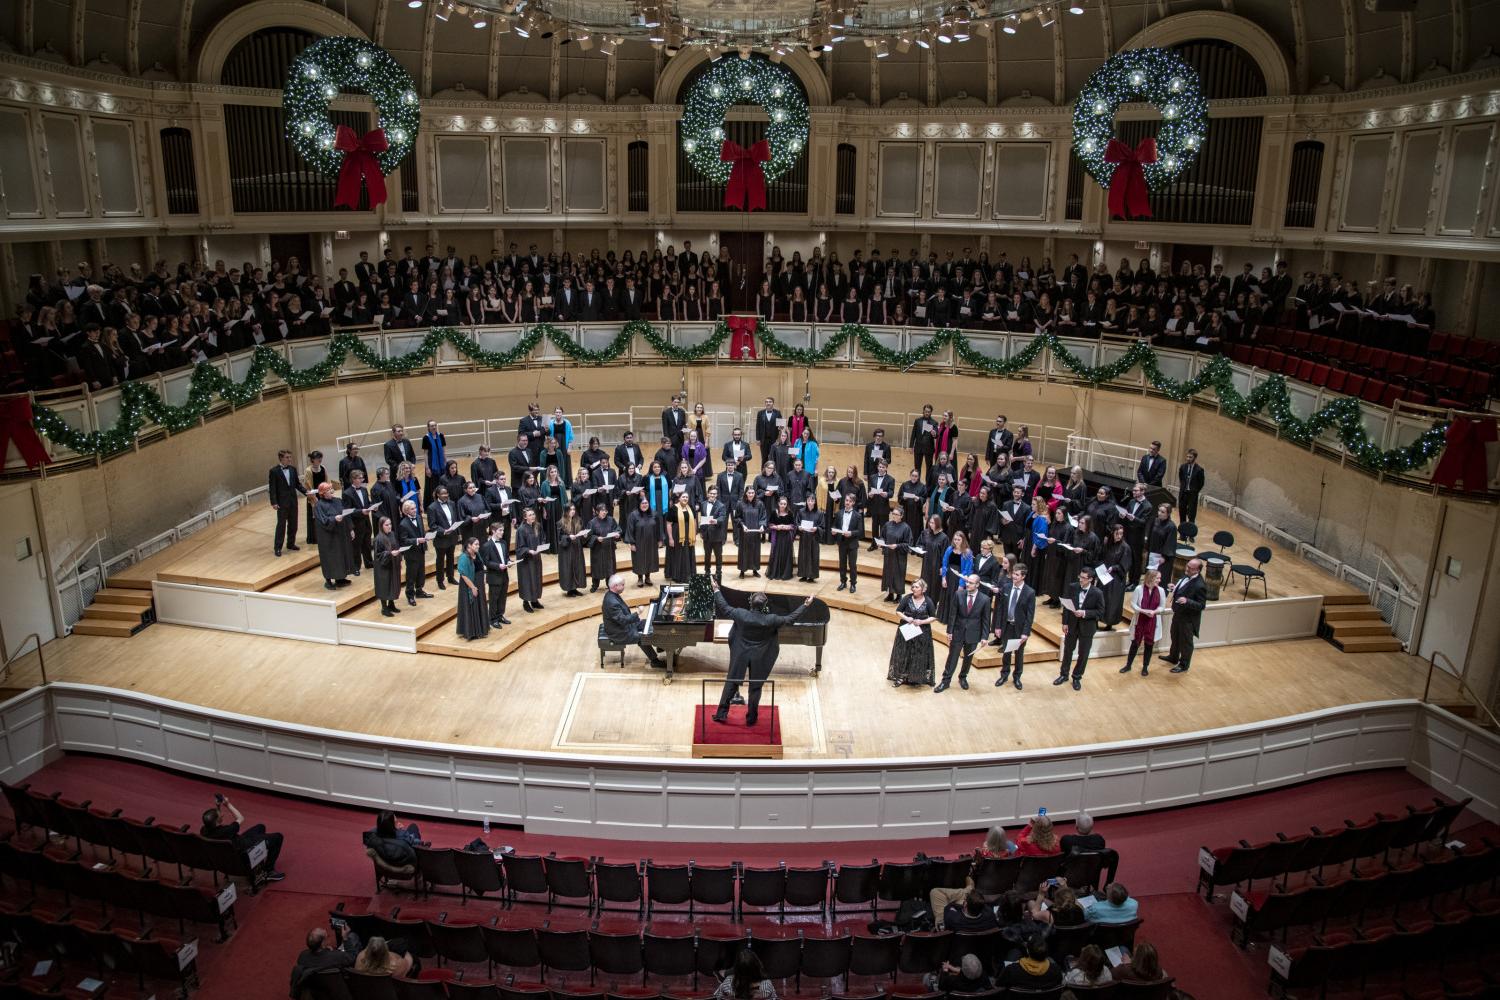 The <a href='http://j4ke.4dian8.com'>bv伟德ios下载</a> Choir performs in the Chicago Symphony Hall.